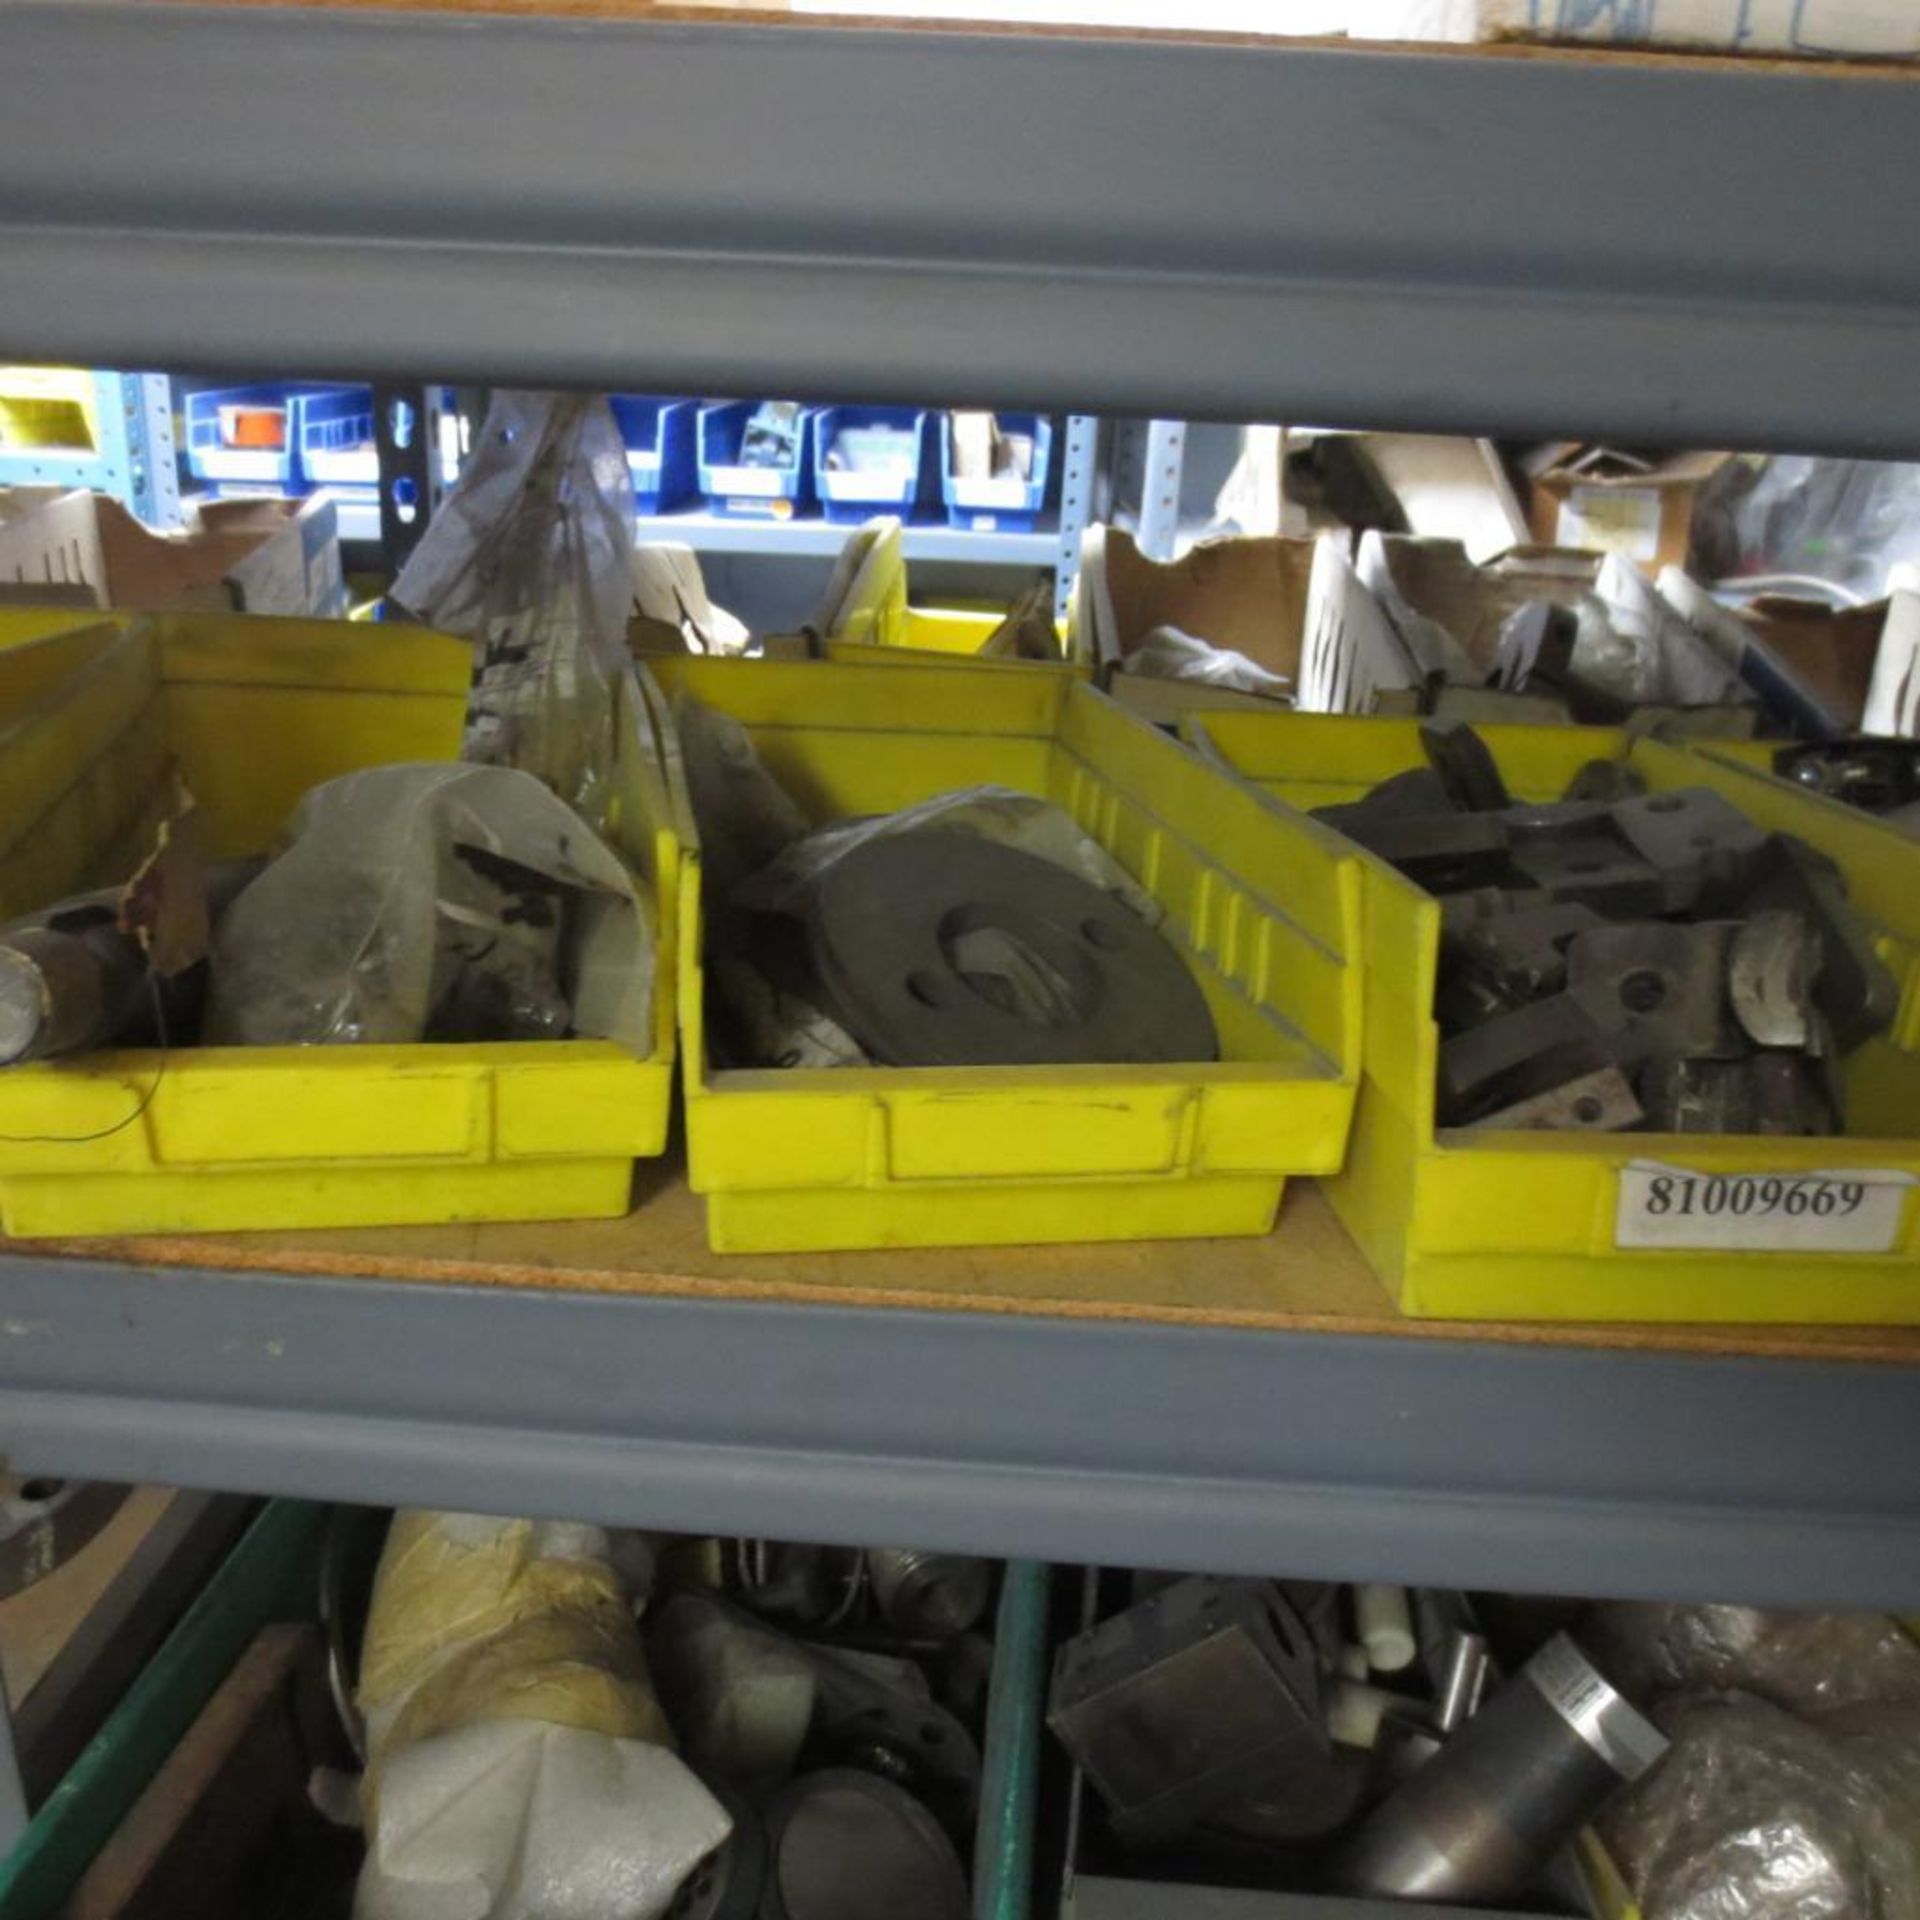 Parts Room Consisting of Gears, Electric Boards, Motors, AB Item, Filters, Motor Starters and Parts - Image 14 of 42